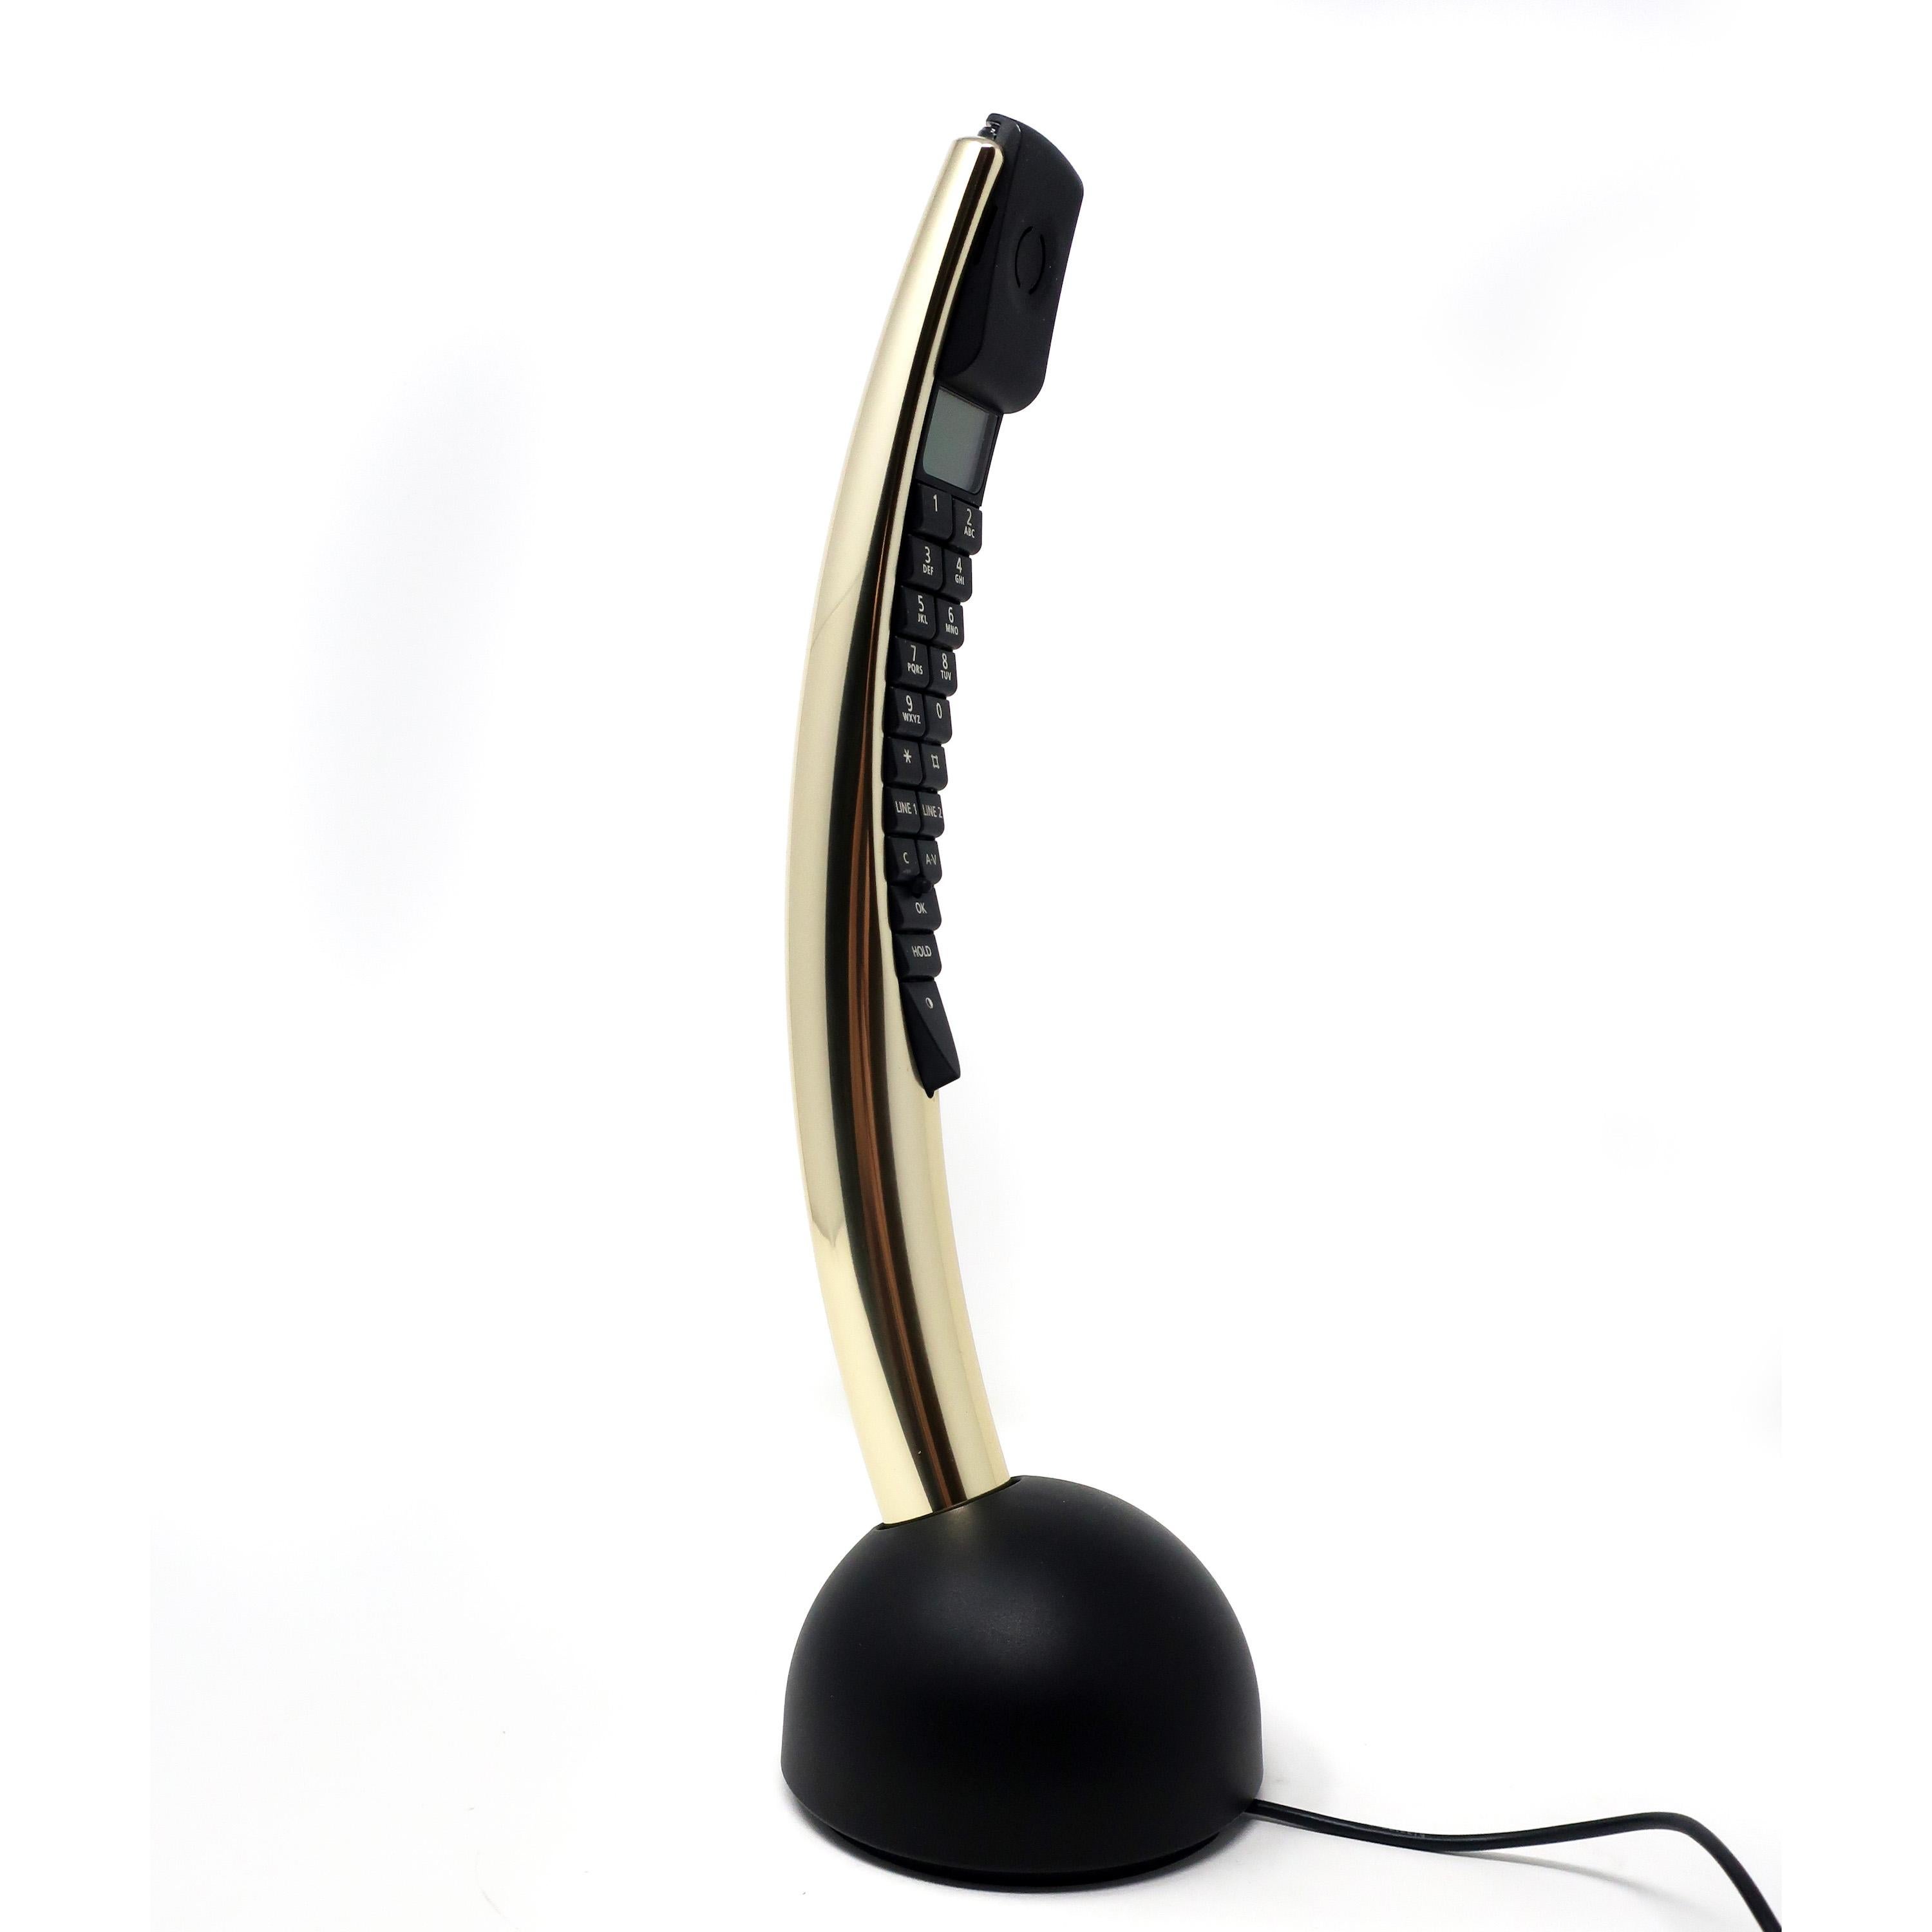 Designed by David Lewis with a curved aluminum body to fit naturally in the user’s hand, B&O’s BeoCom2 cordless telephone was released in March 2002 in a range of colors and finishes. This highly collectible phone is in the shiny gold finish and